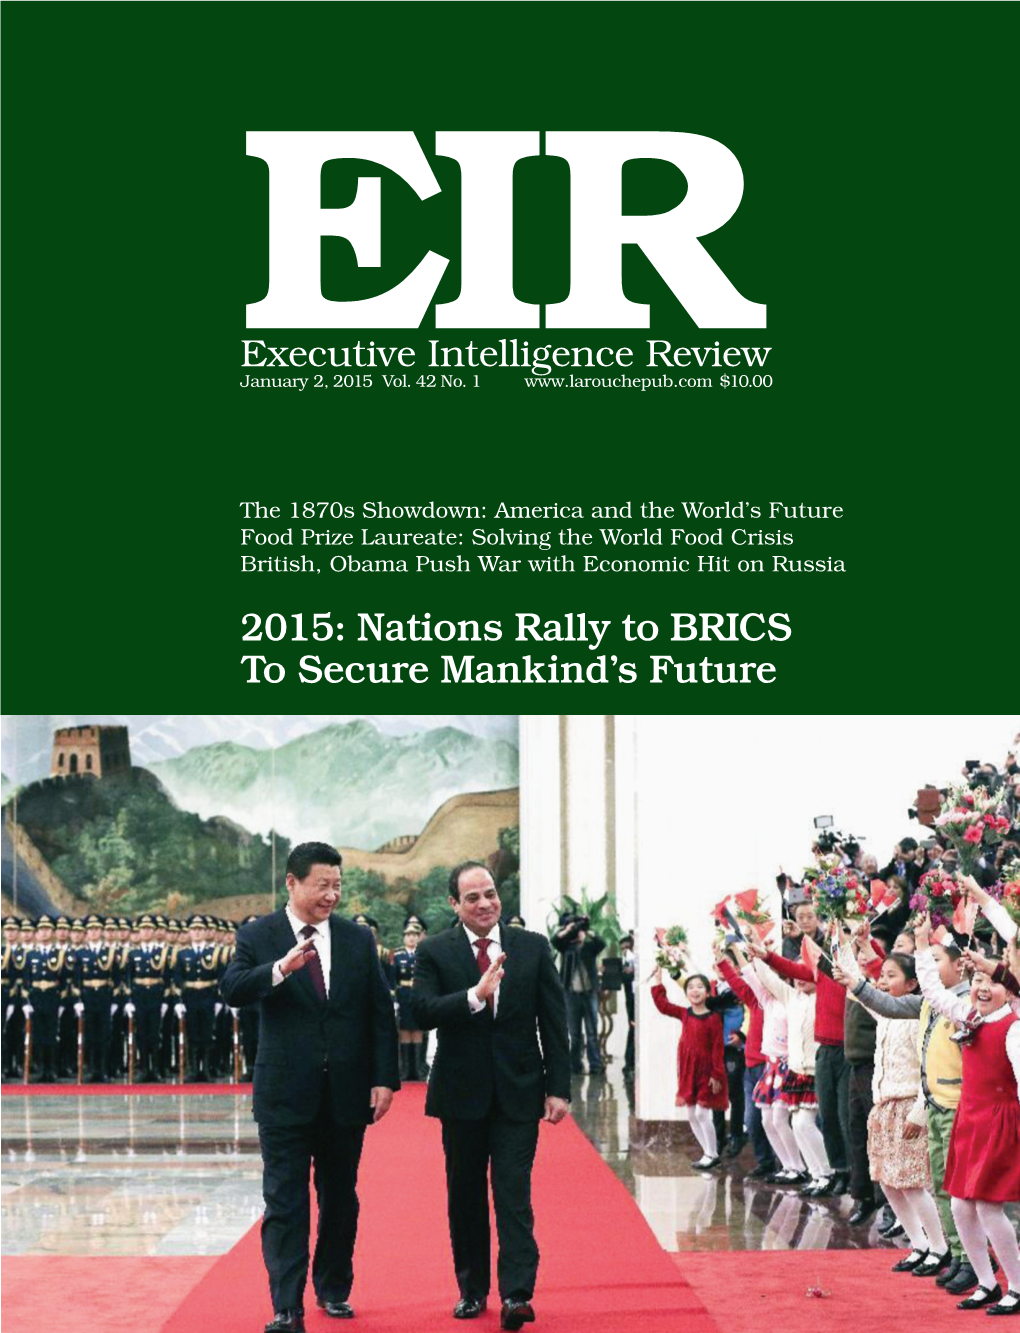 Executive Intelligence Review, Volume 42, Number 1, January 2, 2015